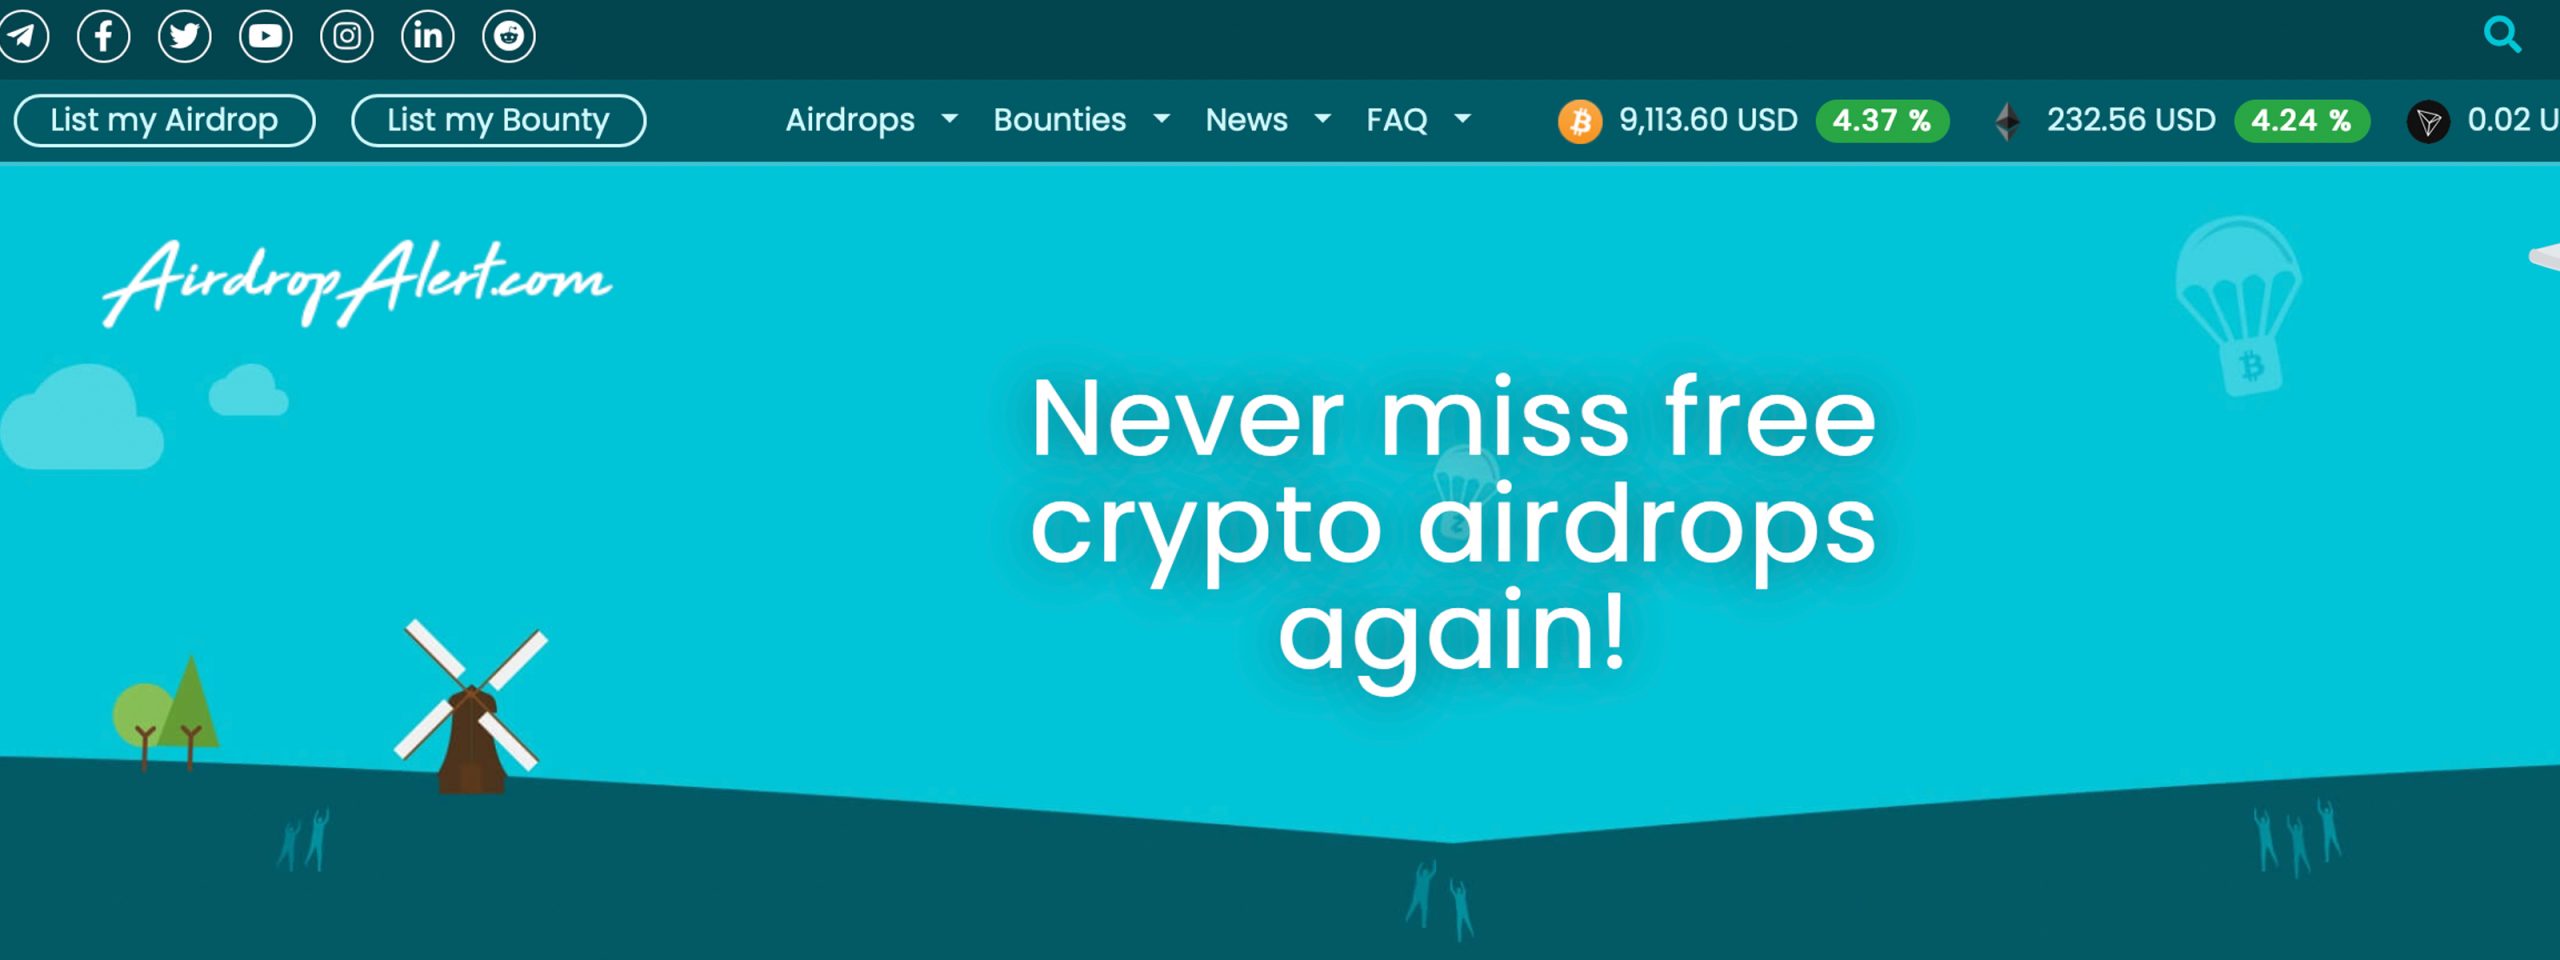 Cryptocurrency Airdrops and Giveaways: What They Are and What's Next